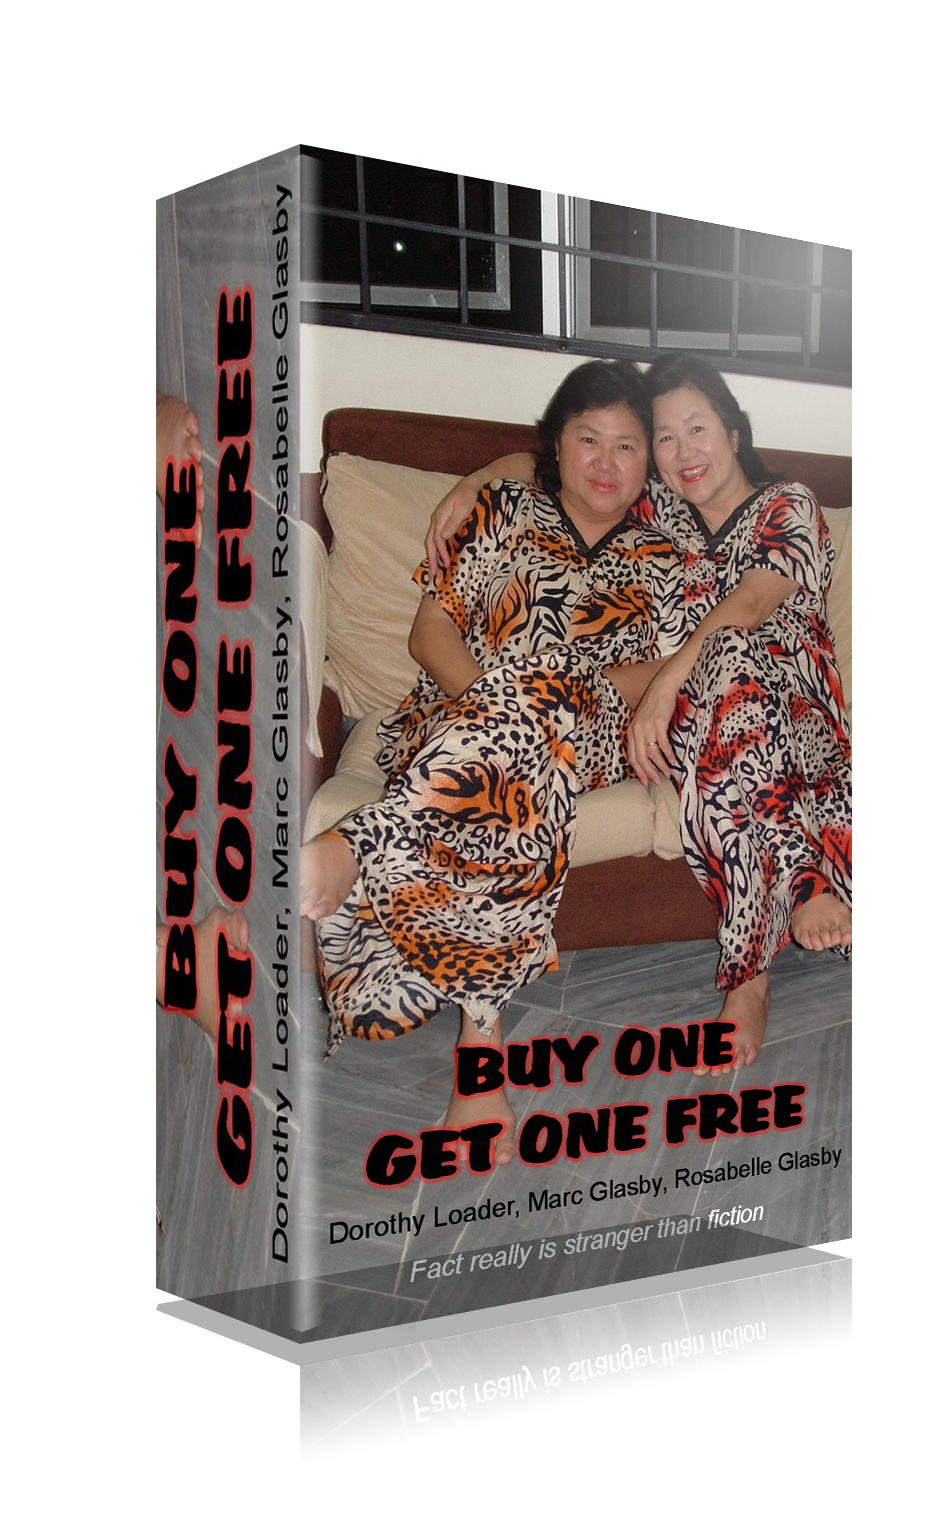 Buy One Get One Free - Fact is stranger than fiction!